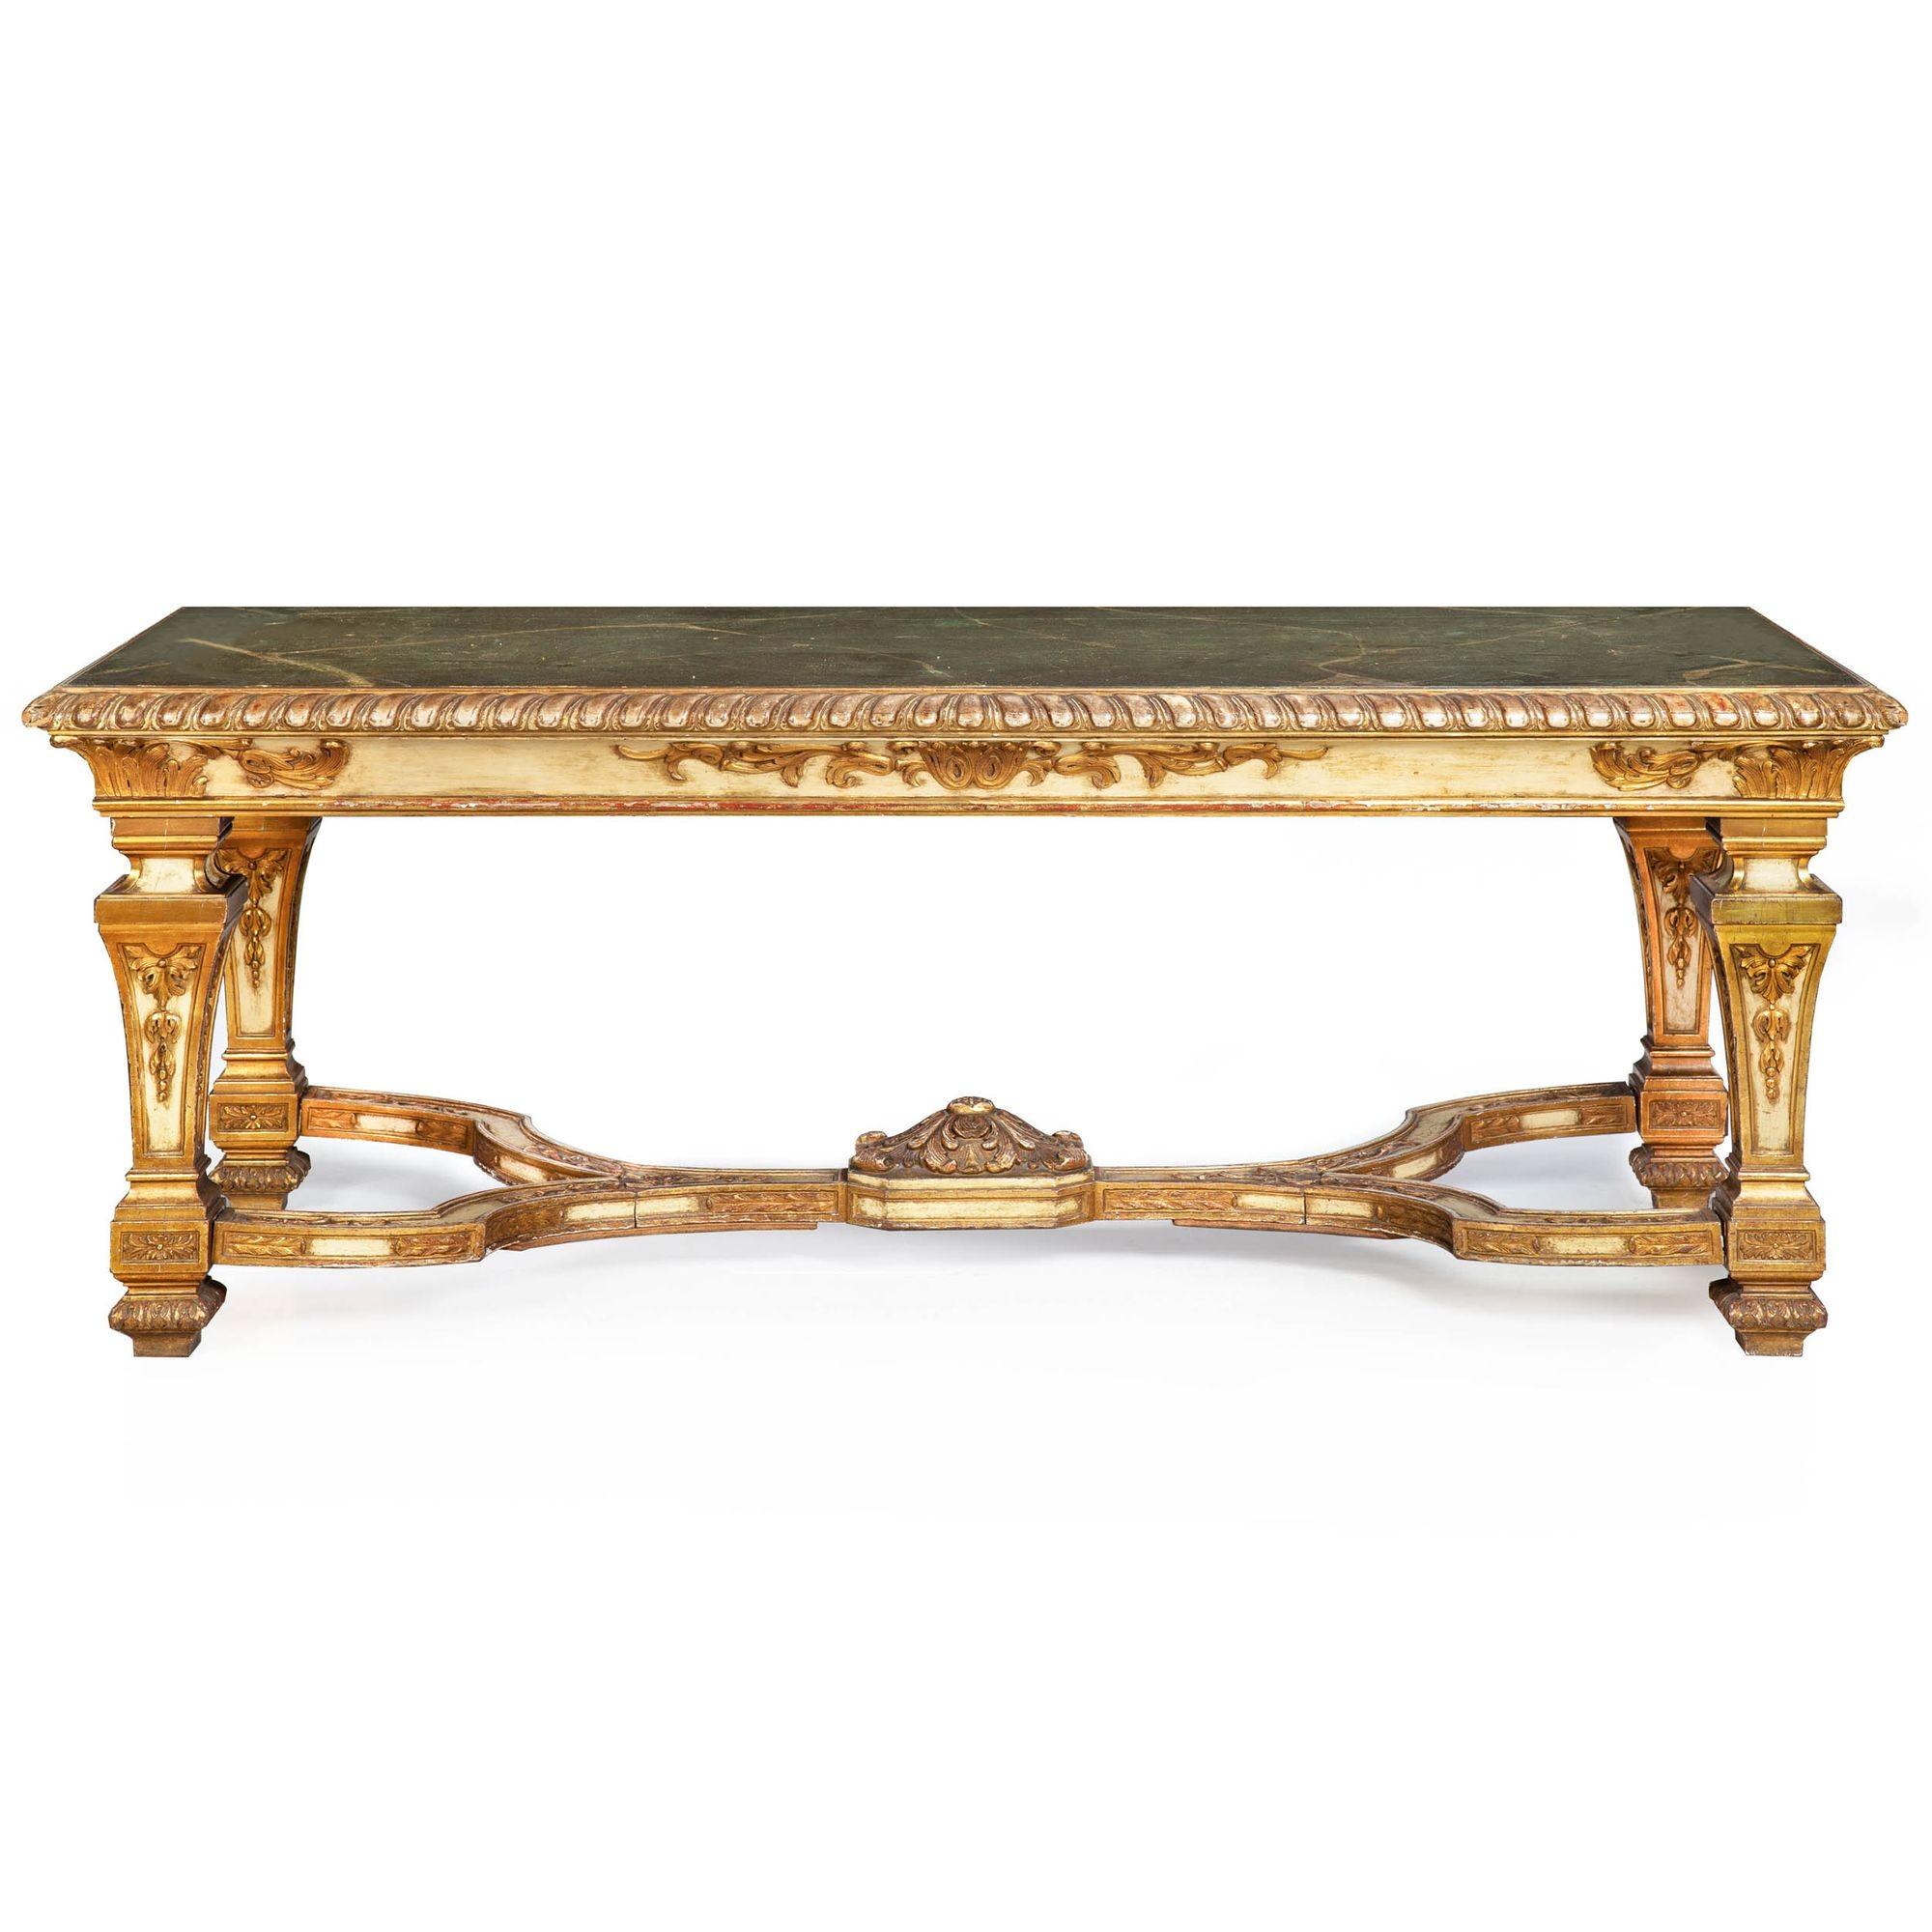 LARGE LOUIS XIV STYLE FAUX-MARBLE POLYCHROMED AND PARCEL GILDED CENTER TABLE
Continental, circa 1900
Item # 403PZN18S

A large and striking center table made in the Louis XIV style from the turn of the century, it features a mottled green